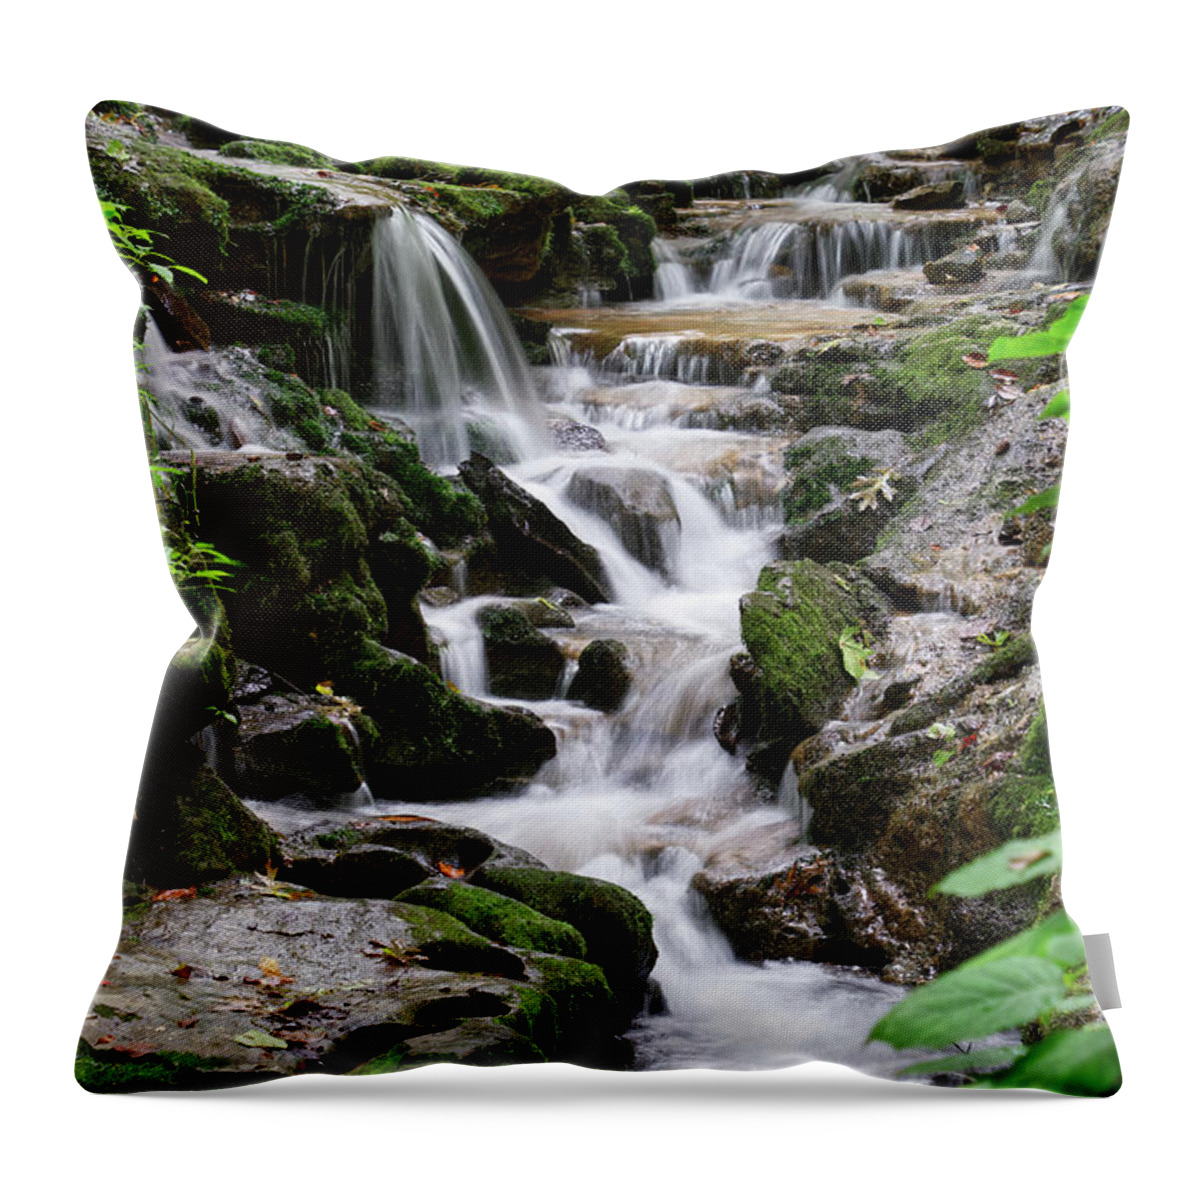 Water Throw Pillow featuring the photograph Running Water by Phil Perkins